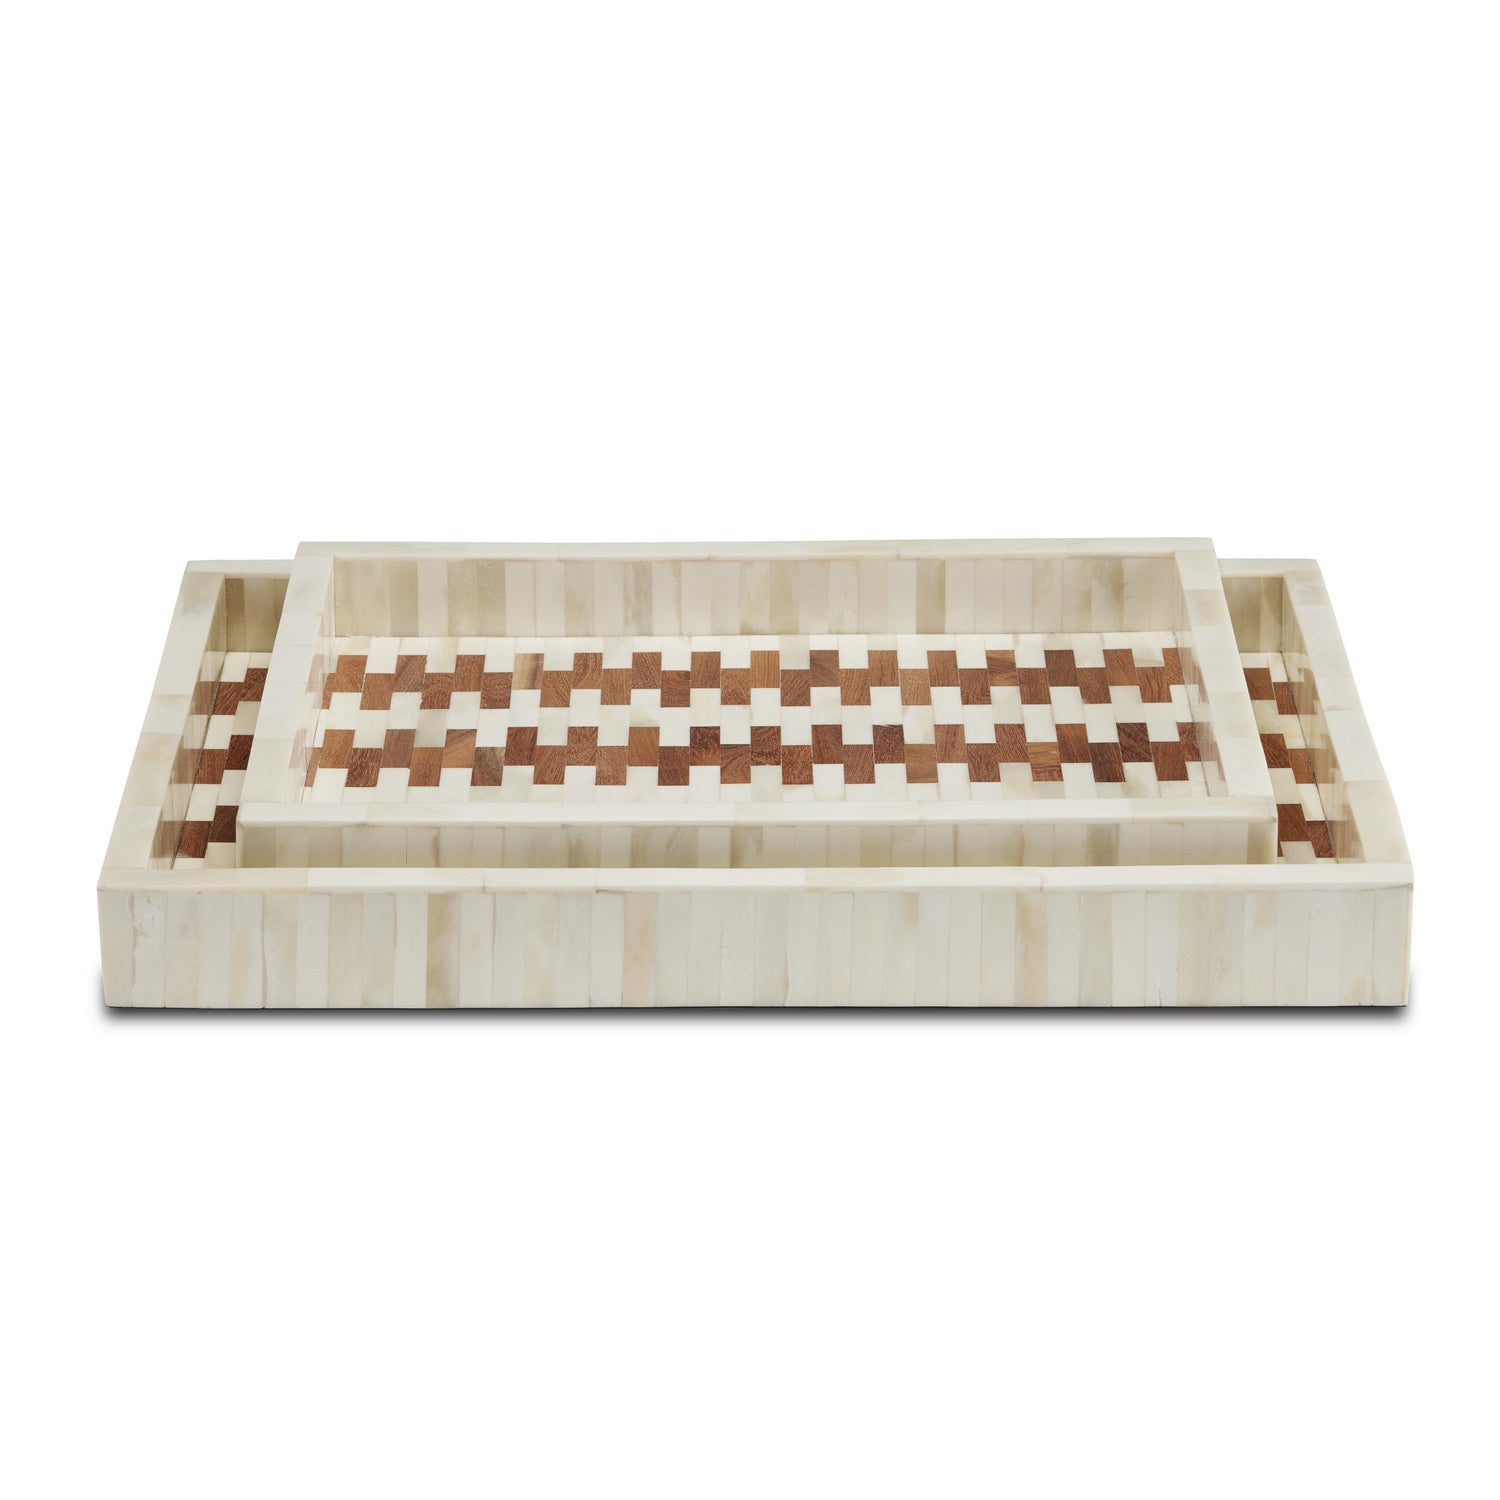 Tray Set of 2 from the Tia collection in White/Natural finish